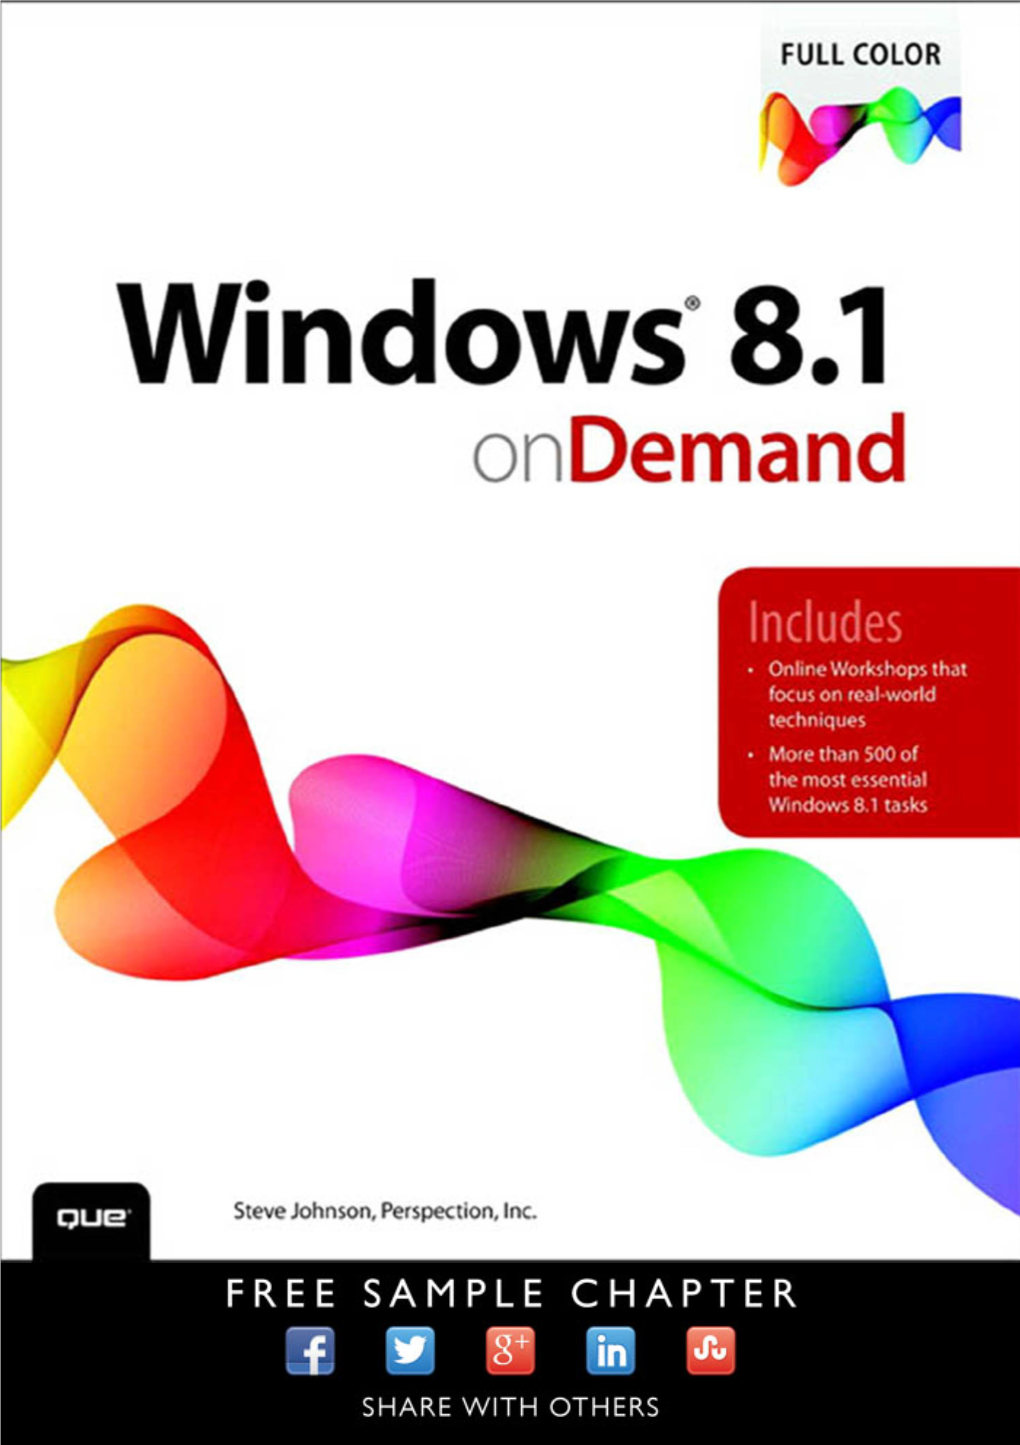 Windows® 8.1 on Demand Publisher Paul Boger Copyright © 2014 by Perspection, Inc